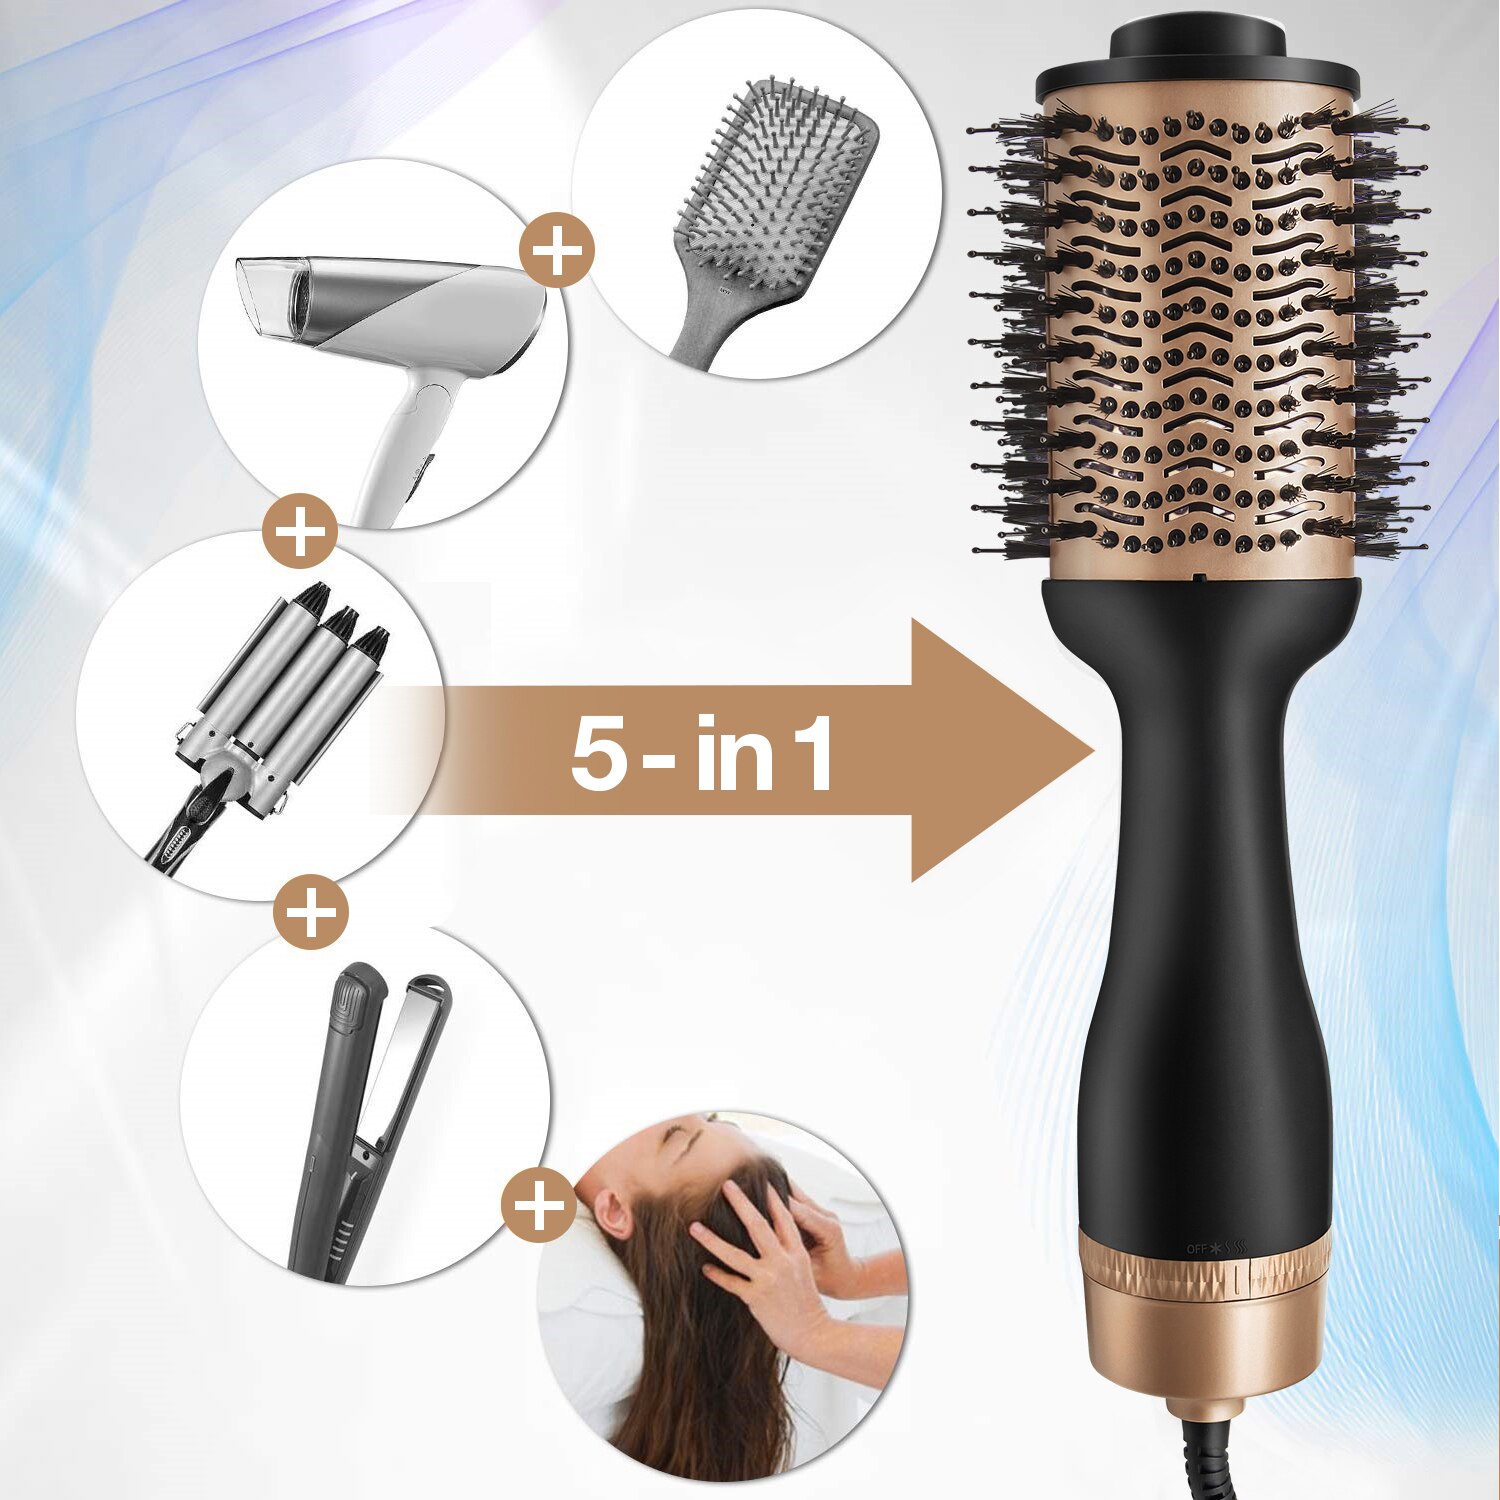 Professional-One-Step-Hair-Dryer-and-Volumizer-Blow-Hairdryer-With-Hair-Styler-Straightener-Curling--1005001529151005